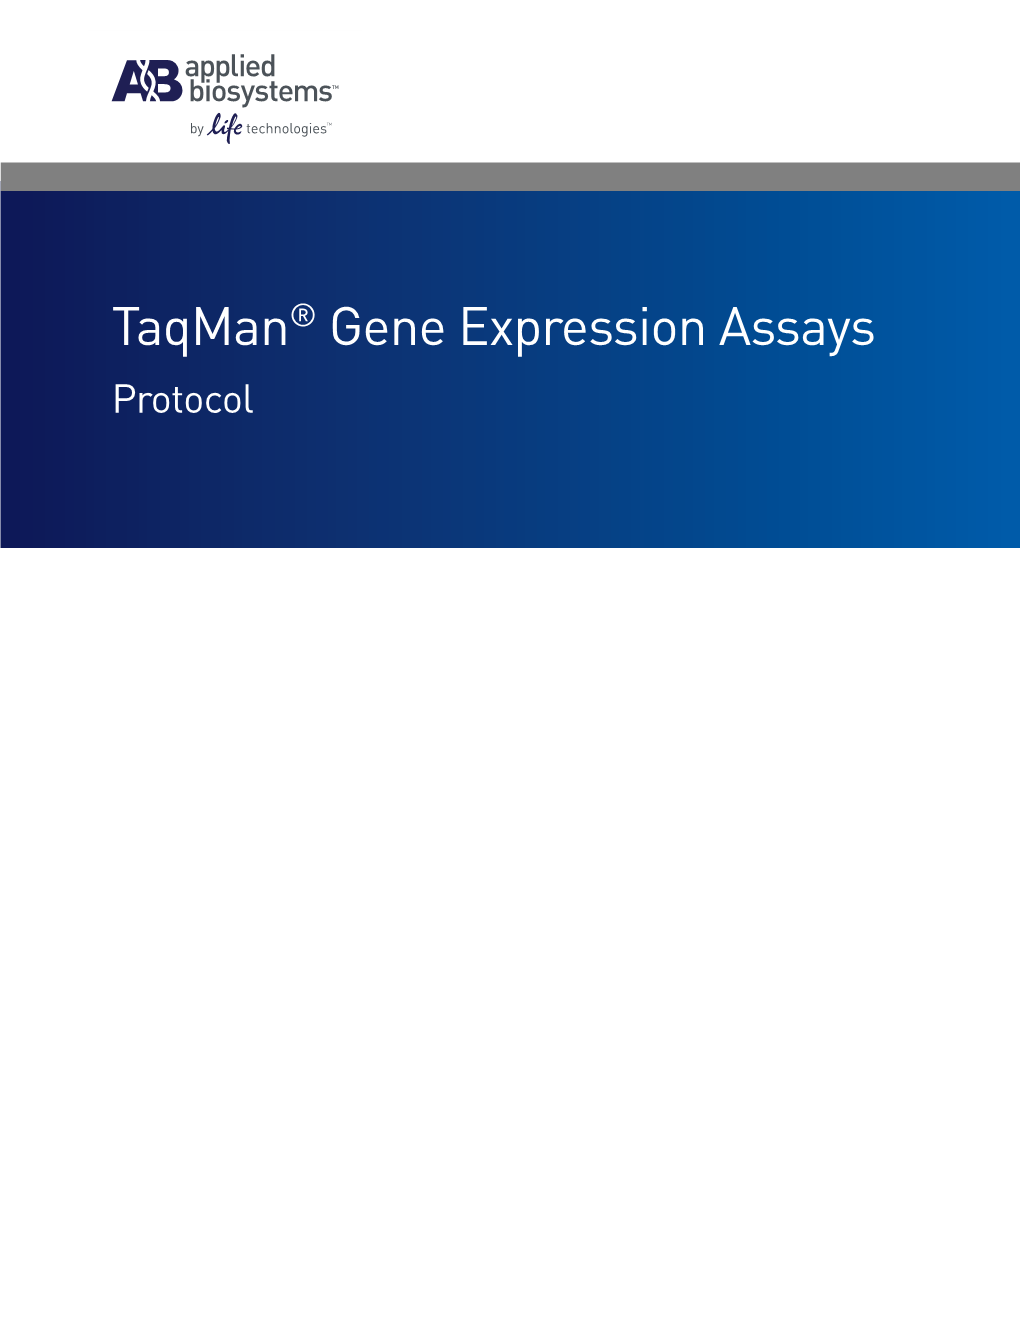 Taqman® Gene Expression Assays Protocol for Research Use Only